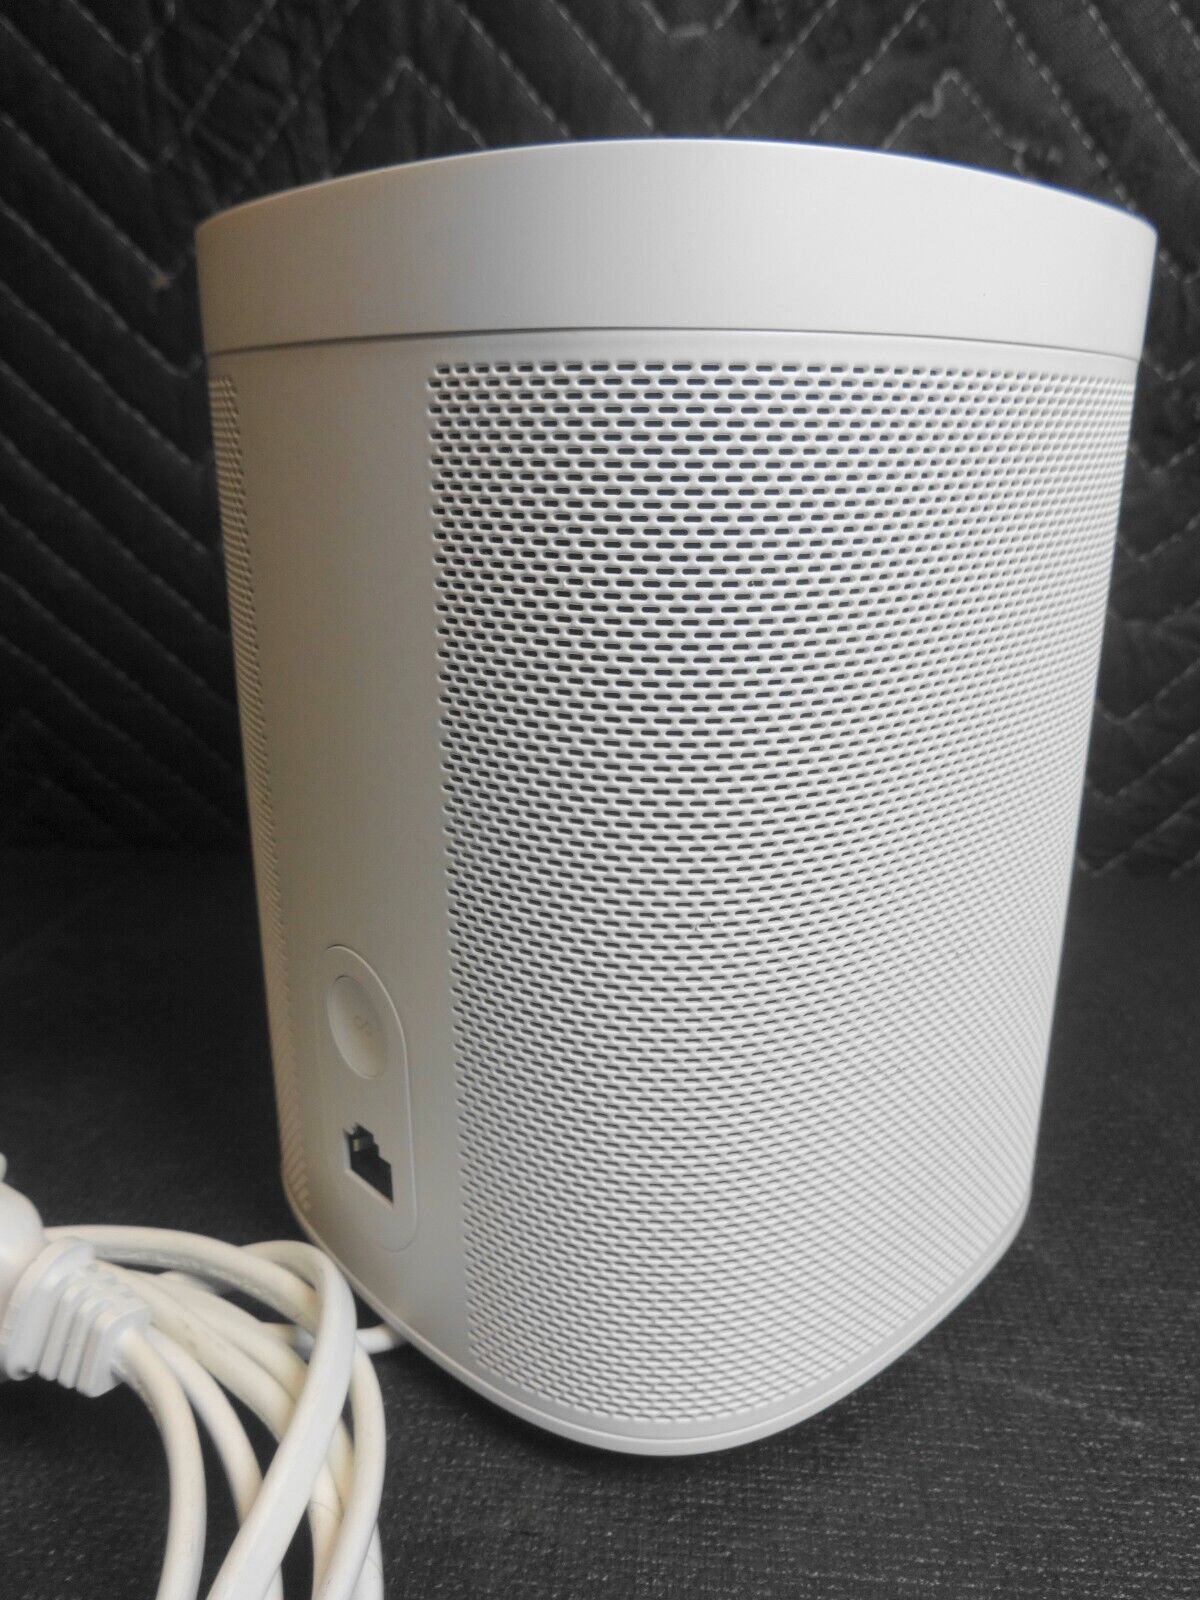 Sonos Speaker Model A100 S13 in White with Power Cord